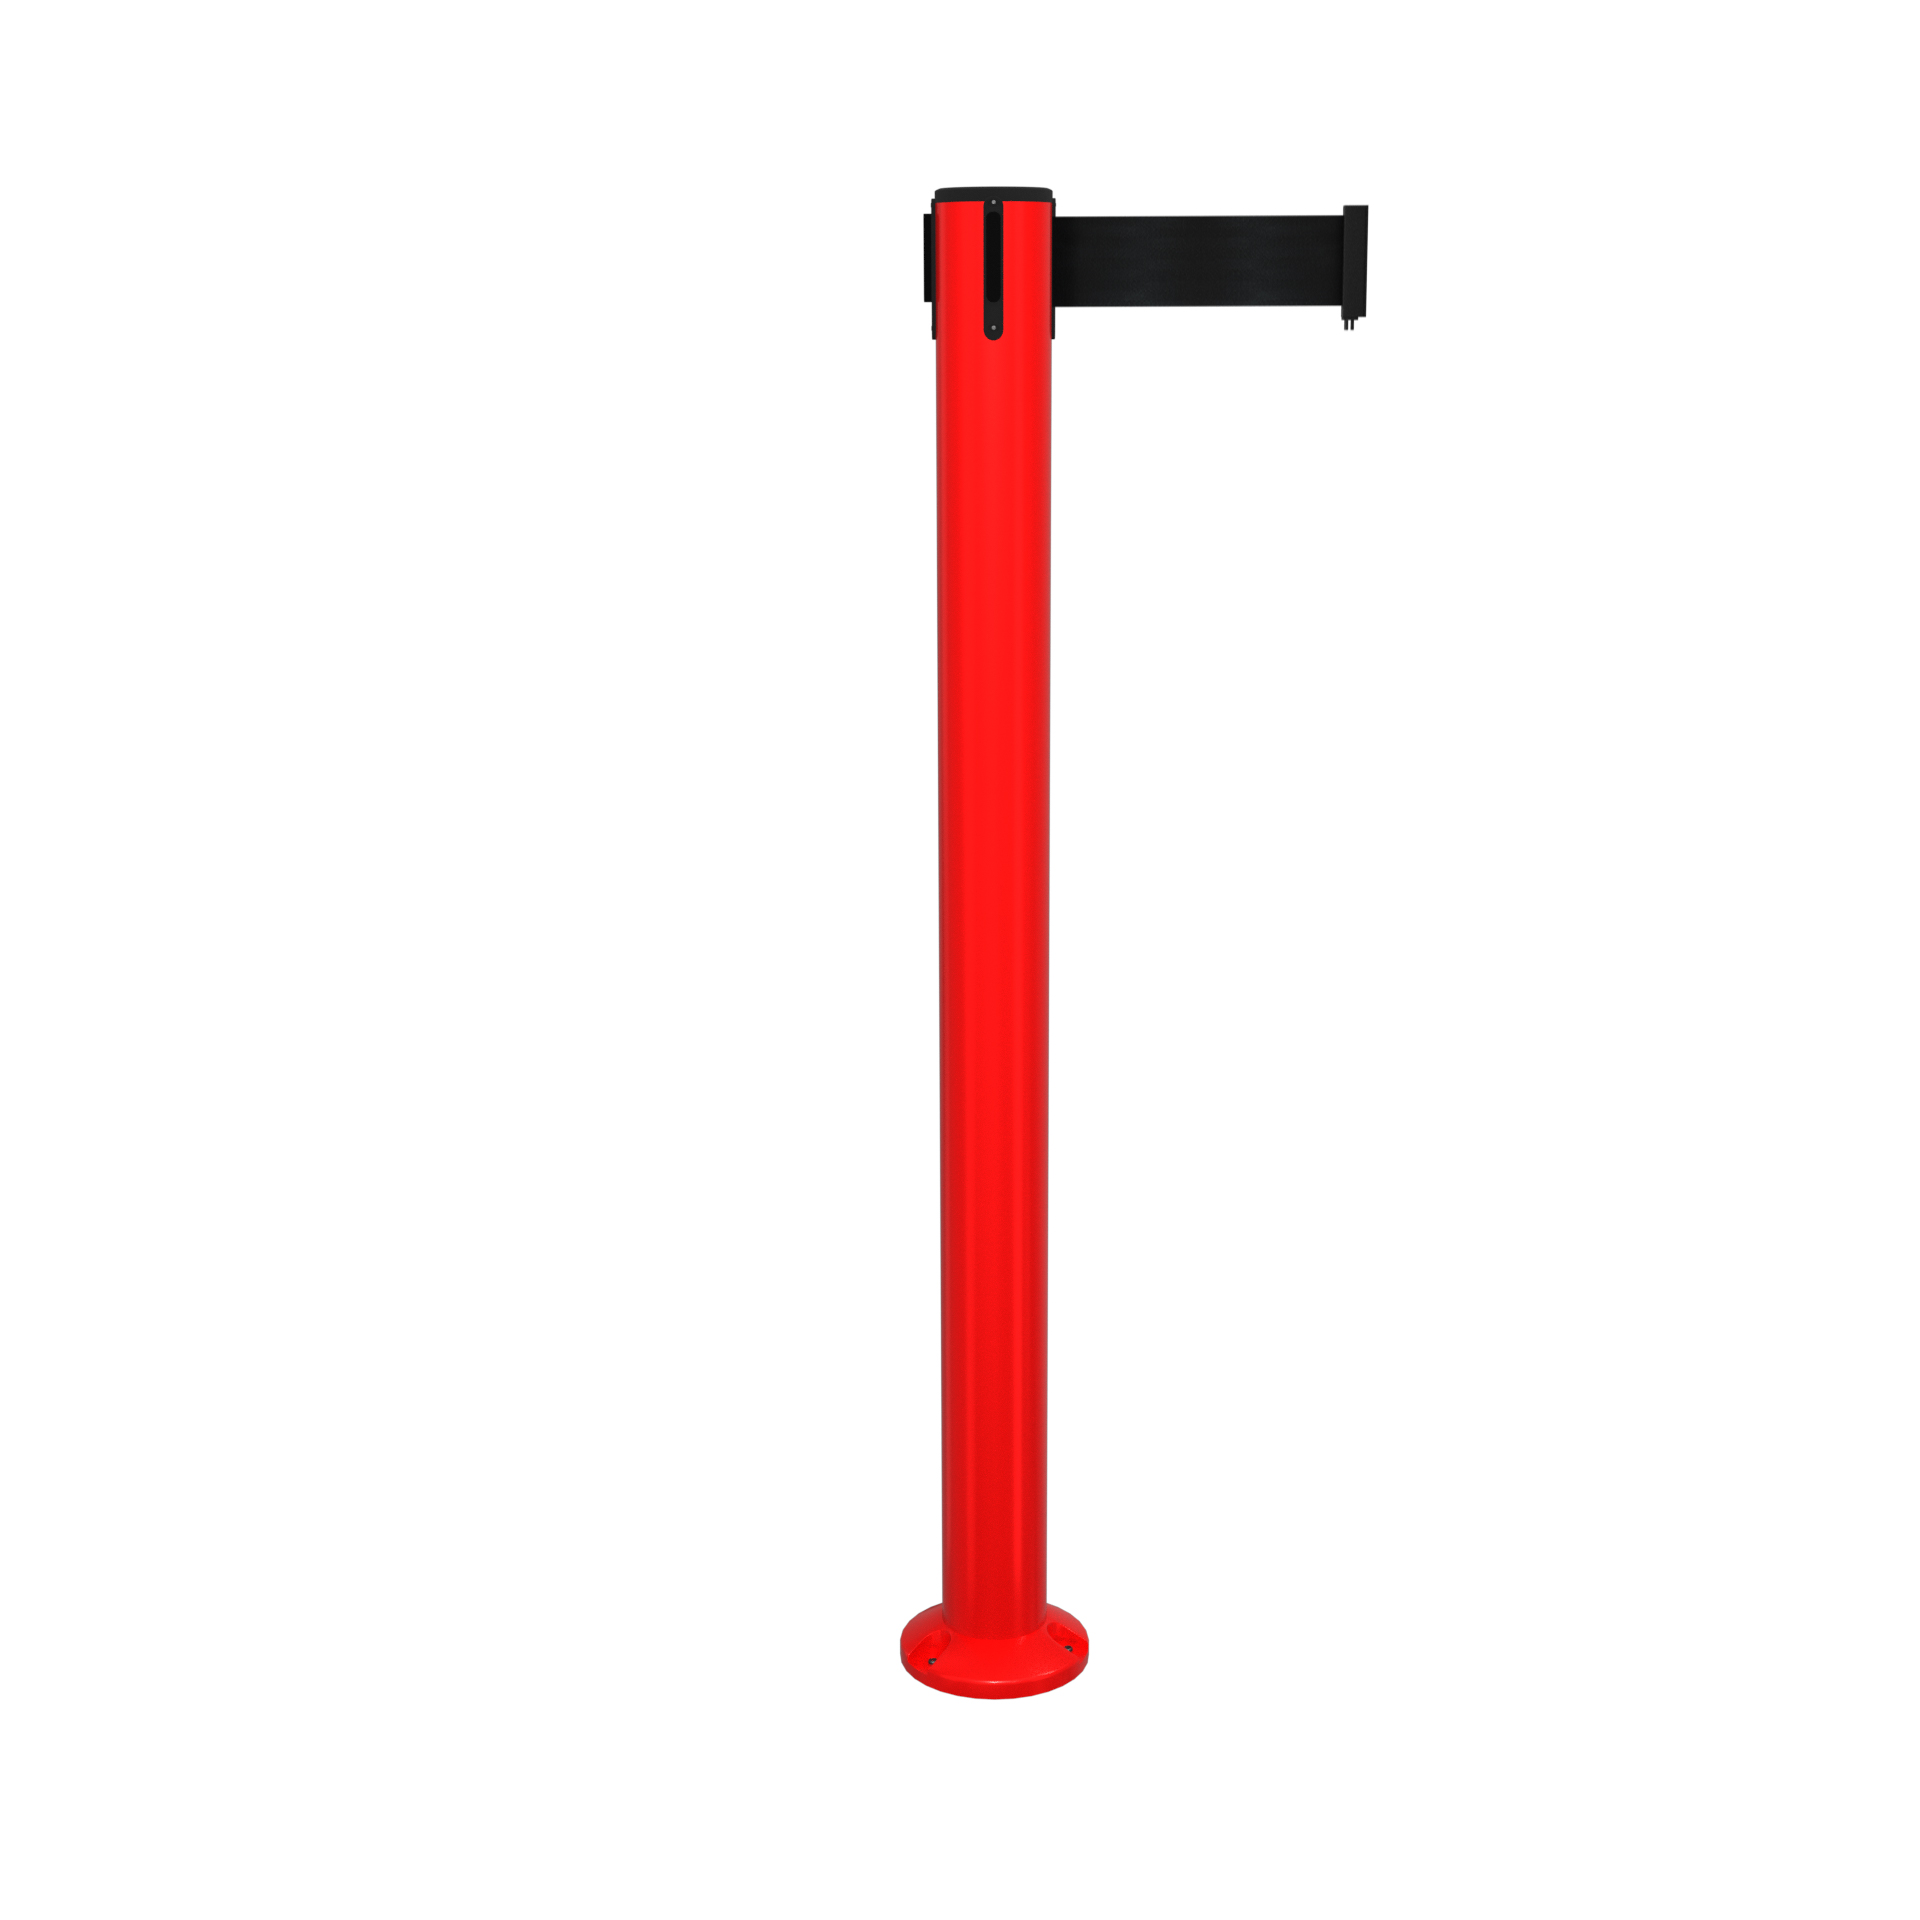 Red SafetyPro 300 Fixed Retractable Belt Barrier